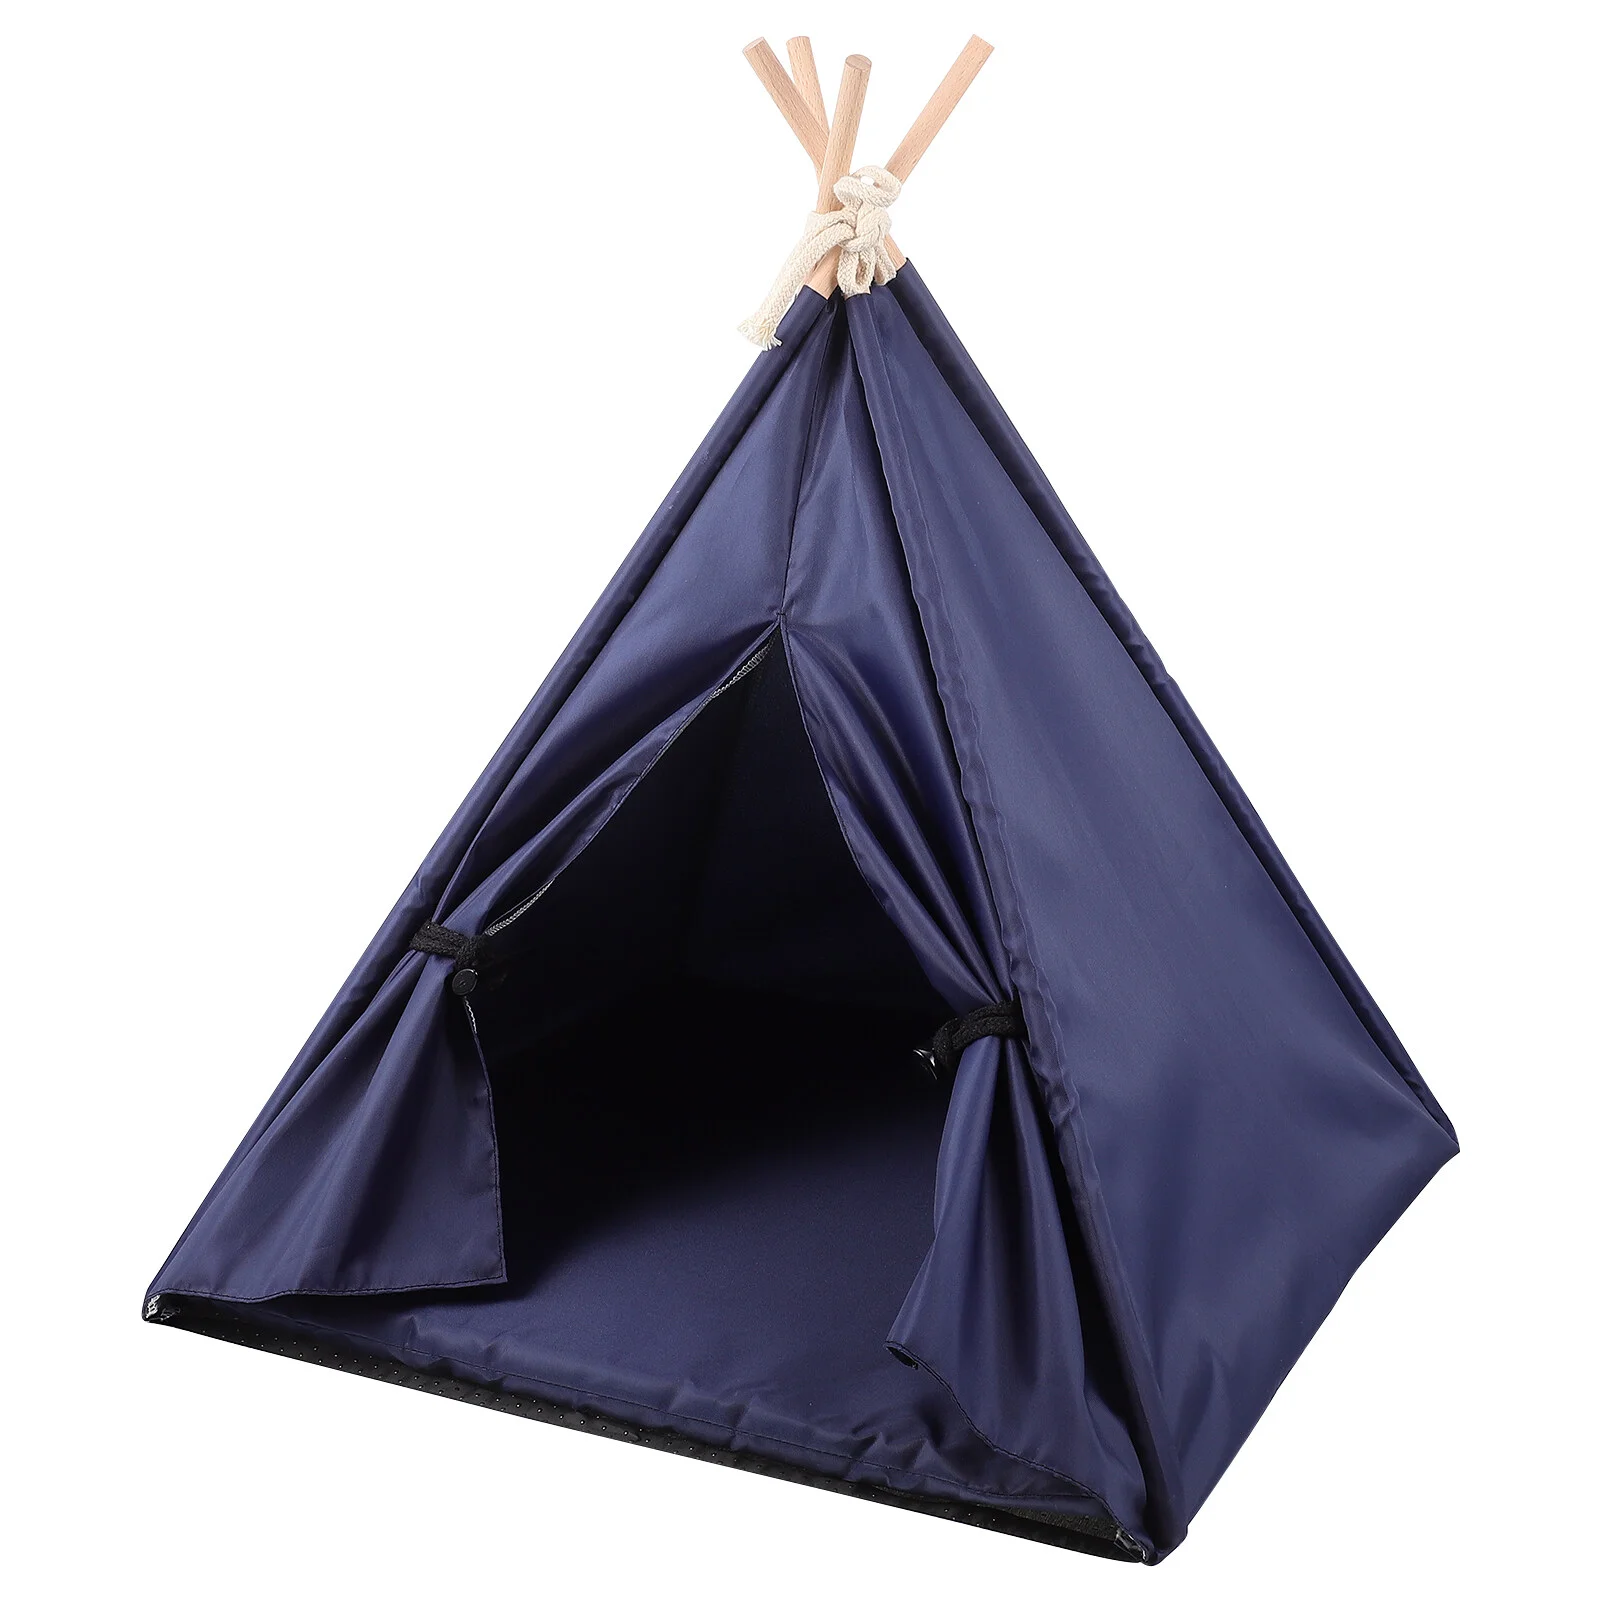 

Dog Tent Cat Bed Teepee Tents Indoor Cats Pet Dogs Mini House Large Outdoor Pets Cave Kitten Medium Sleeping Hiding Cute Camping